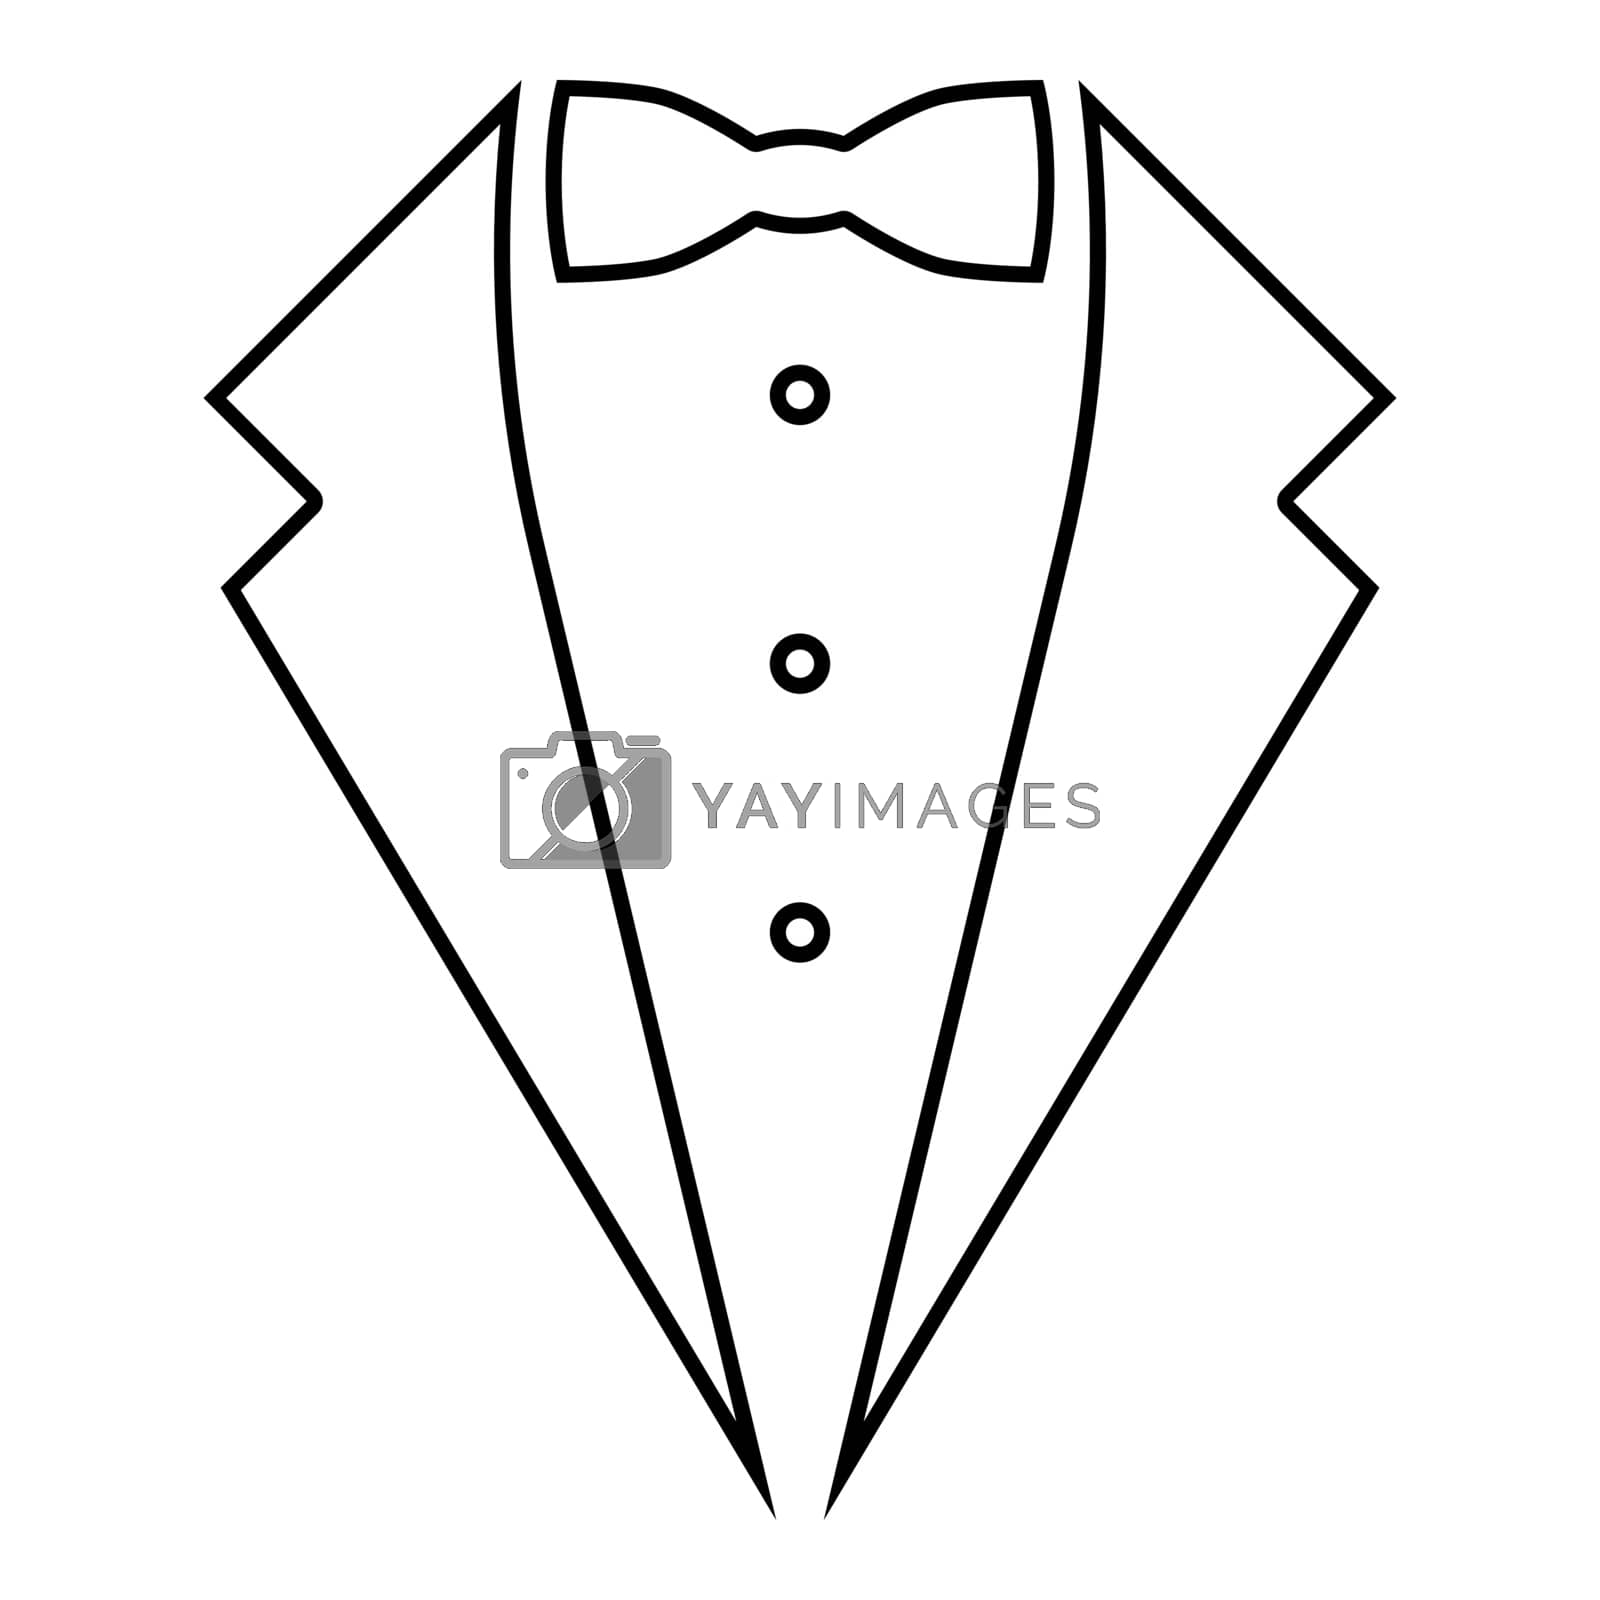 Royalty free image of Symbol service dinner jacket bow Tuxedo concept Tux sign Butler gentleman idea Waiter suit icon black color outline vector illustration flat style image by serhii435